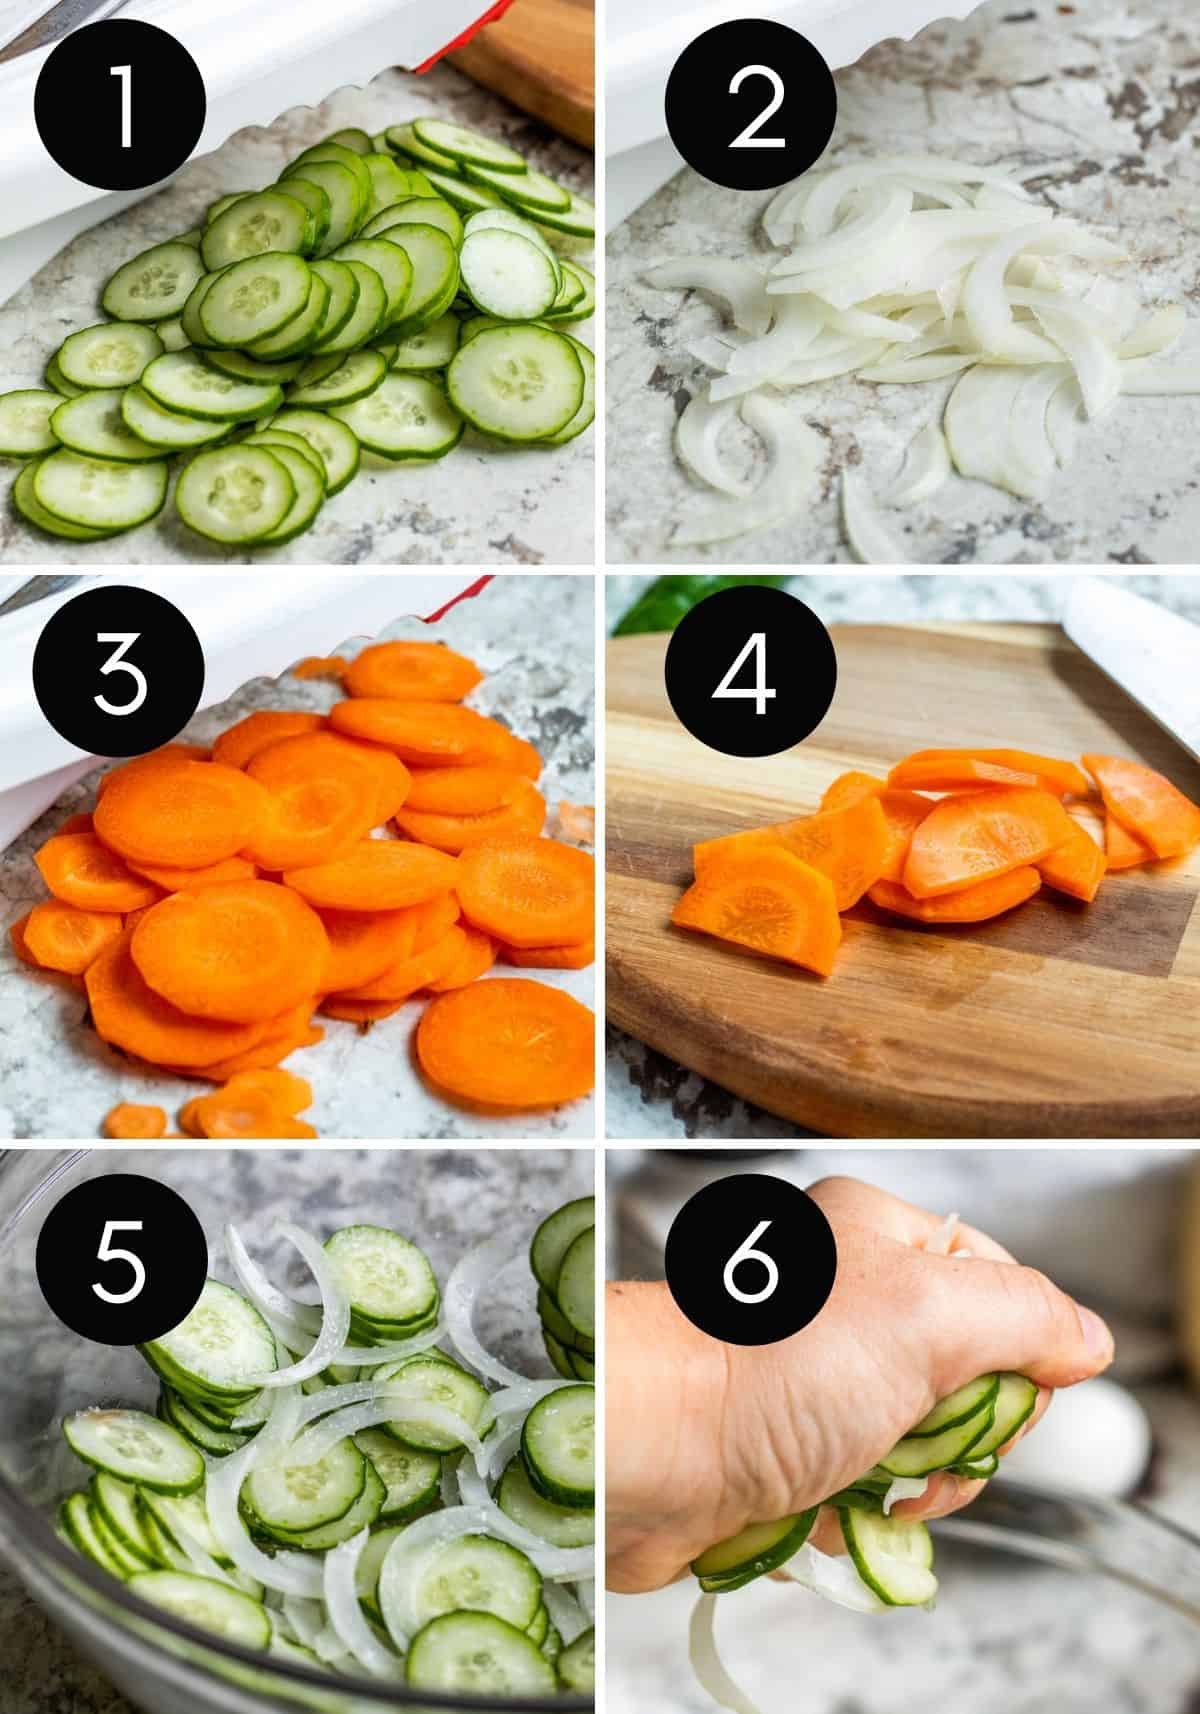 Potato salad veggie prep collage with images of veggies being sliced.